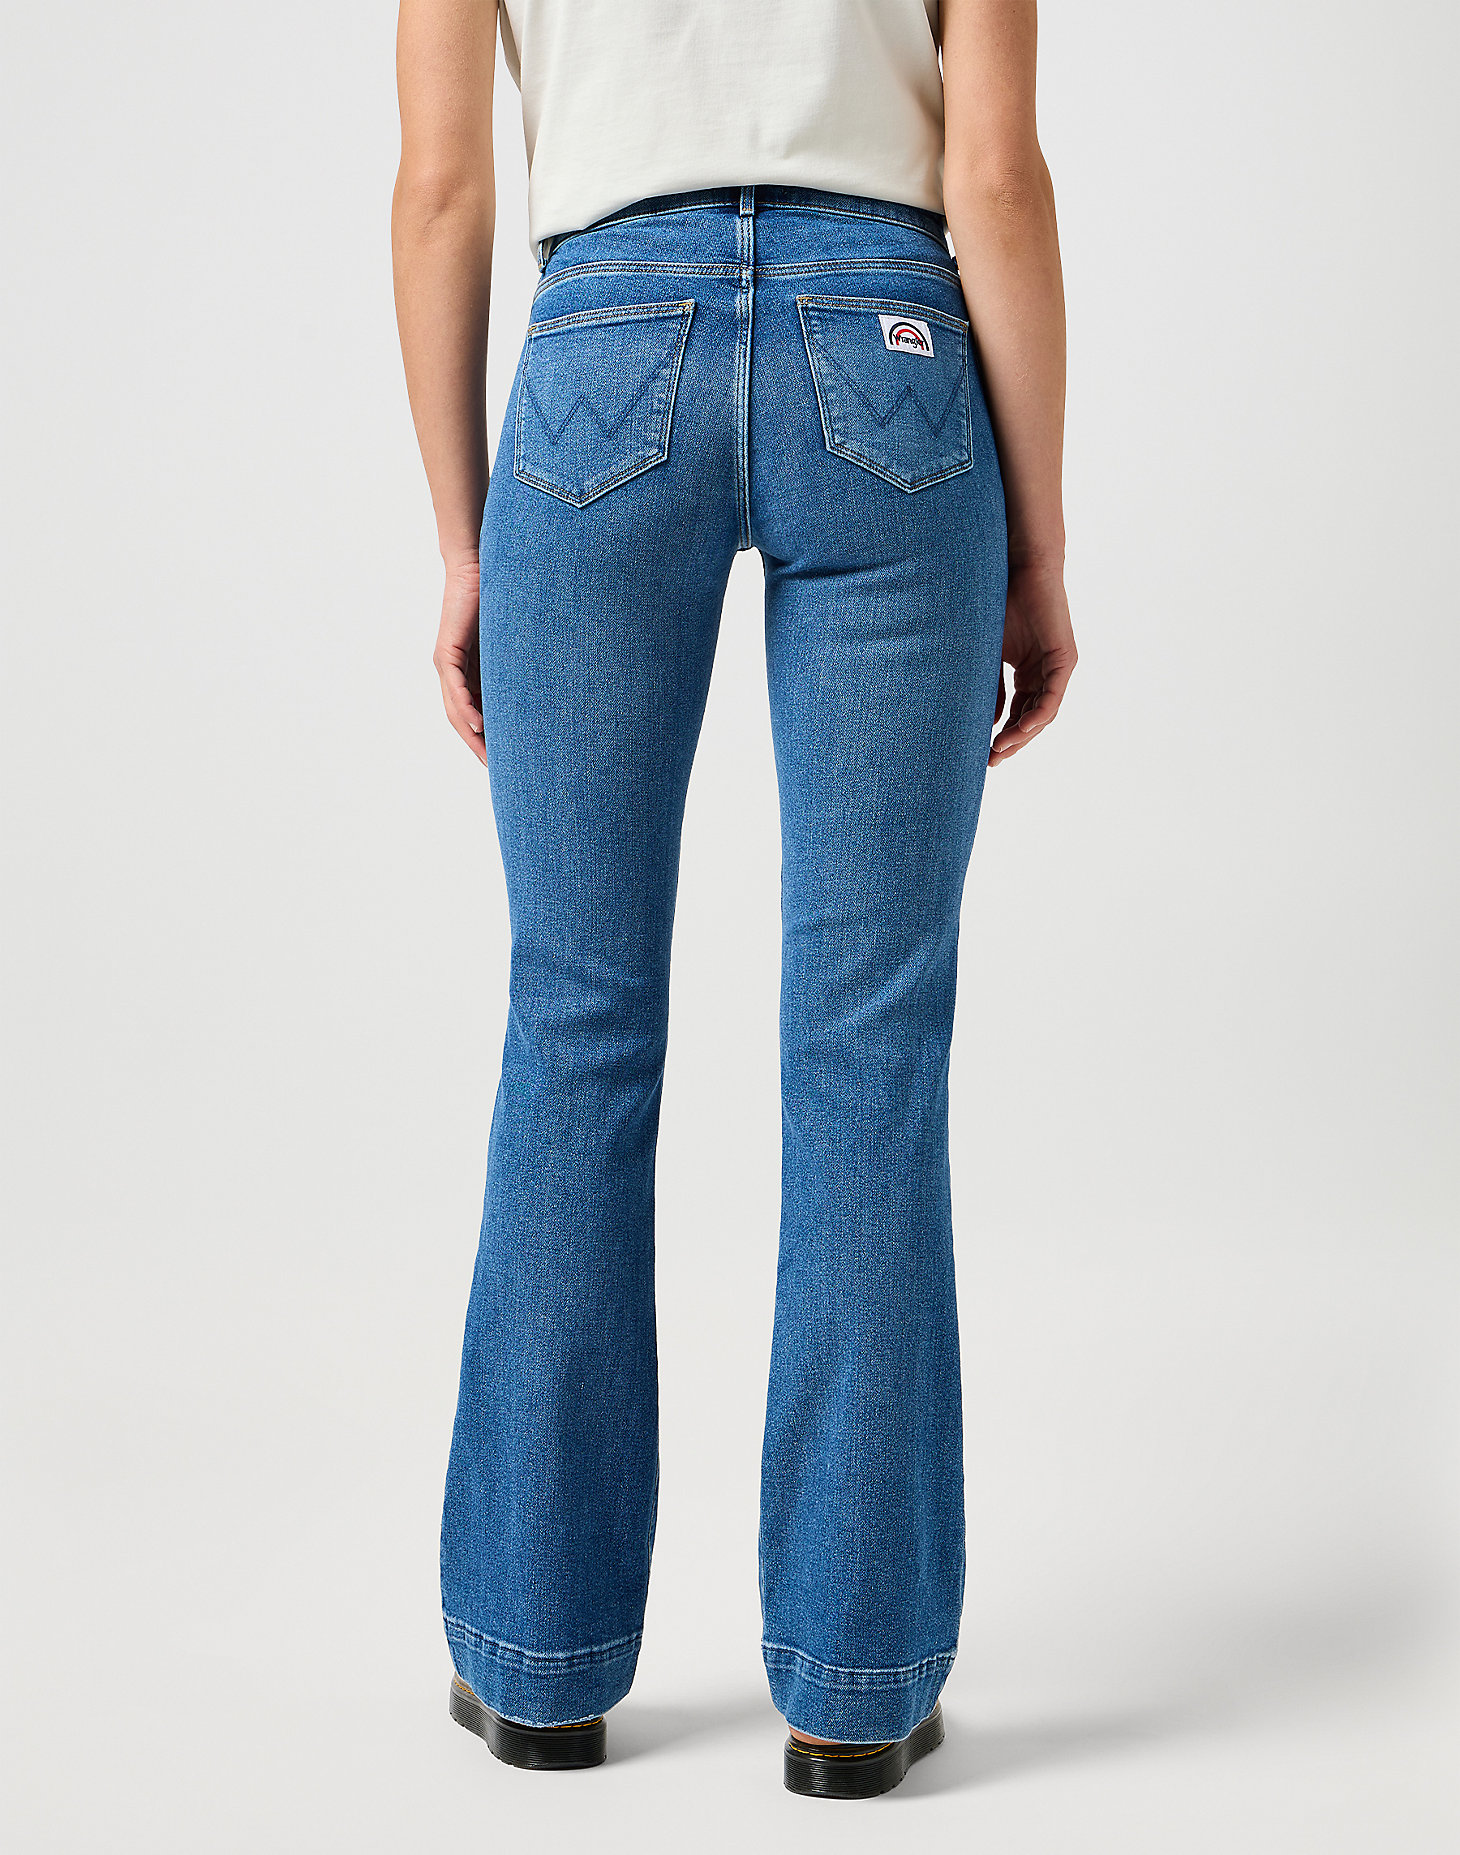 Flare Jeans in Raven alternative view 2